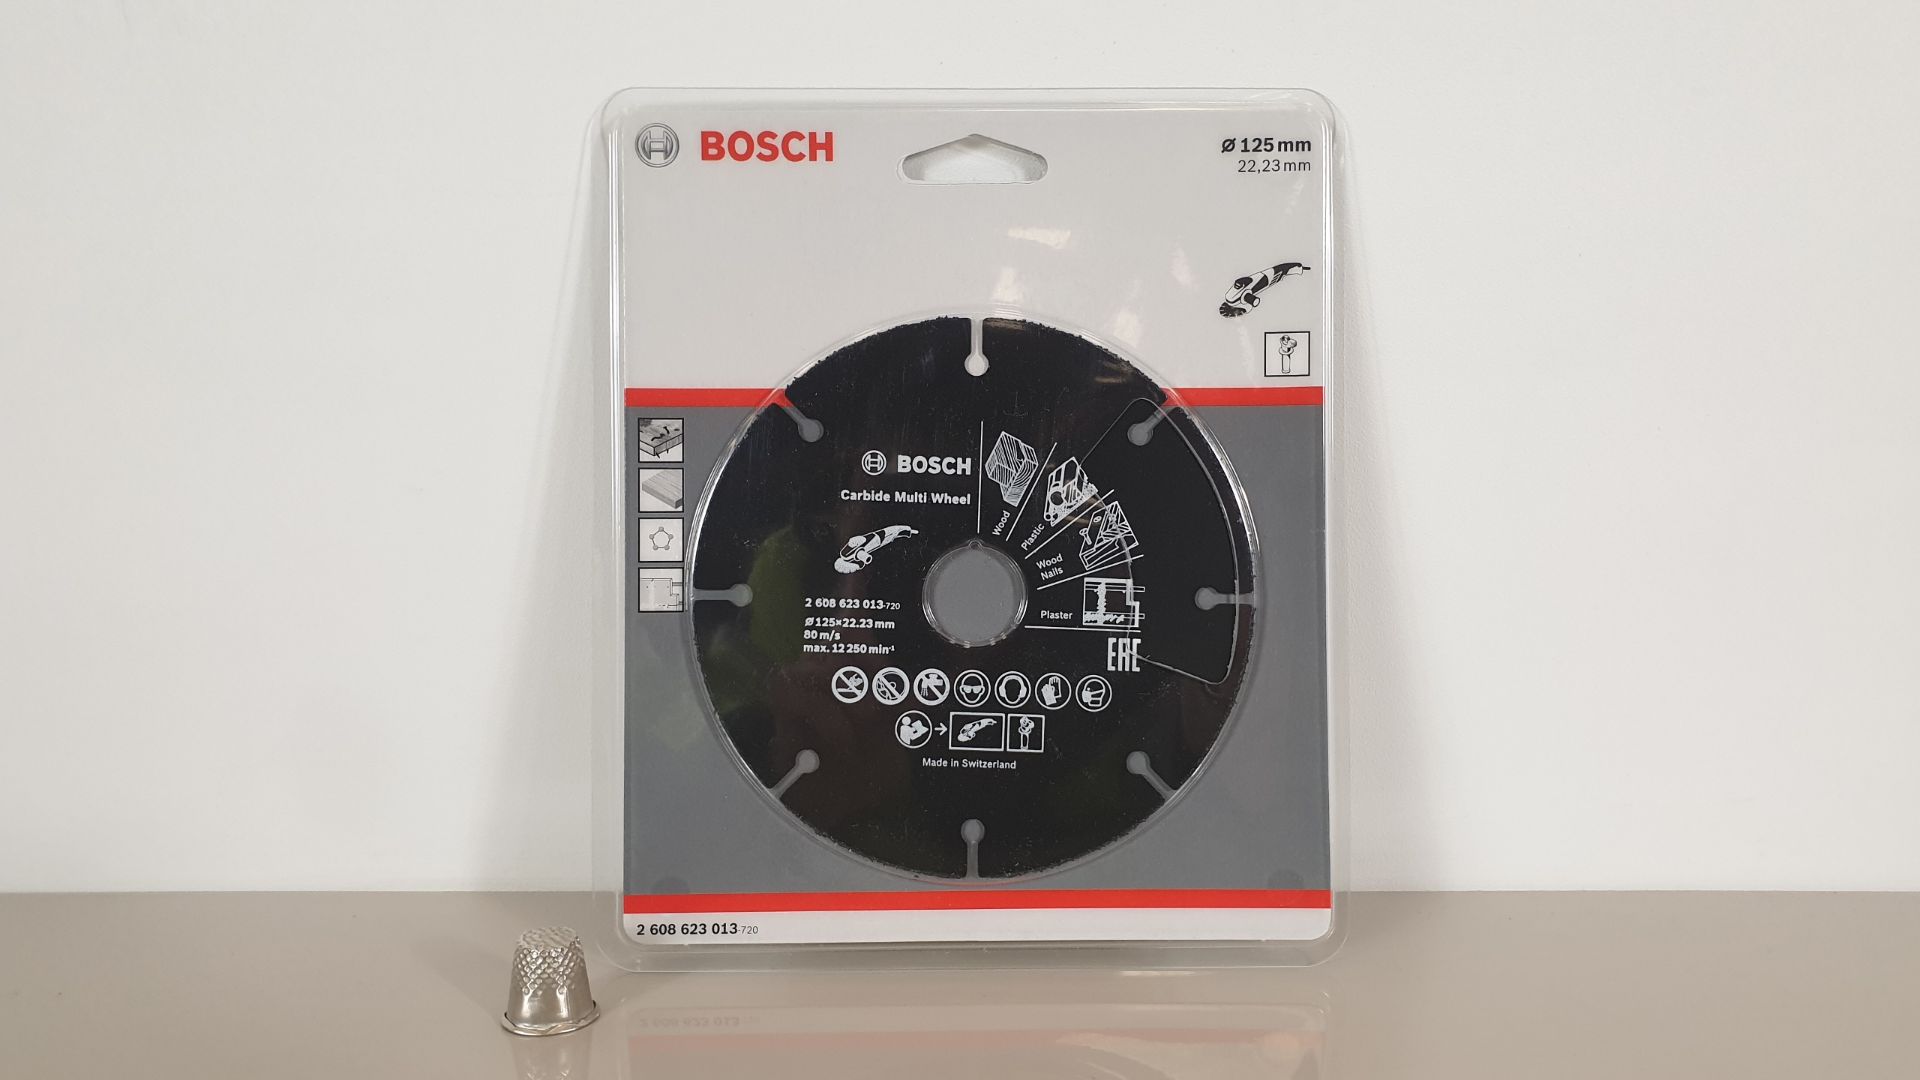 (LOT FOR THURSDAY 28TH MAY AUCTION) 25 X BRAND NEW BOSCH CARBIDE MULTI WHEEL CUTTING BLADES 125MM